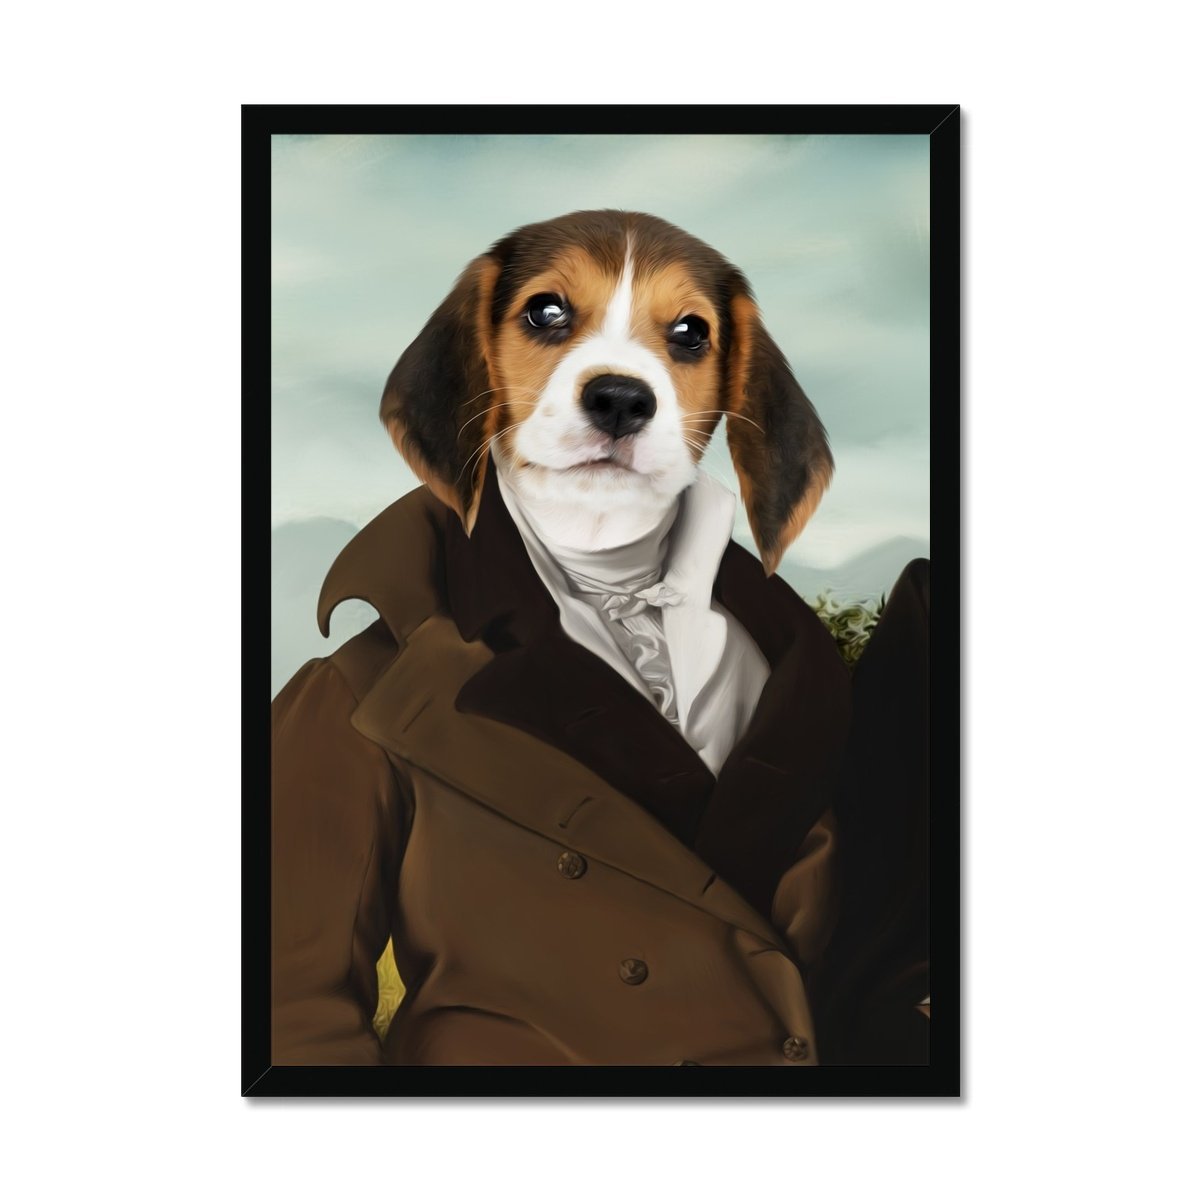 The Scholar: Custom Pet Portrait - Paw & Glory, paw and glory, your dog in a painting, pet portrait websites, animals in uniform, pet paintings royal, pet portrait gift, dog artworks, pet portraits